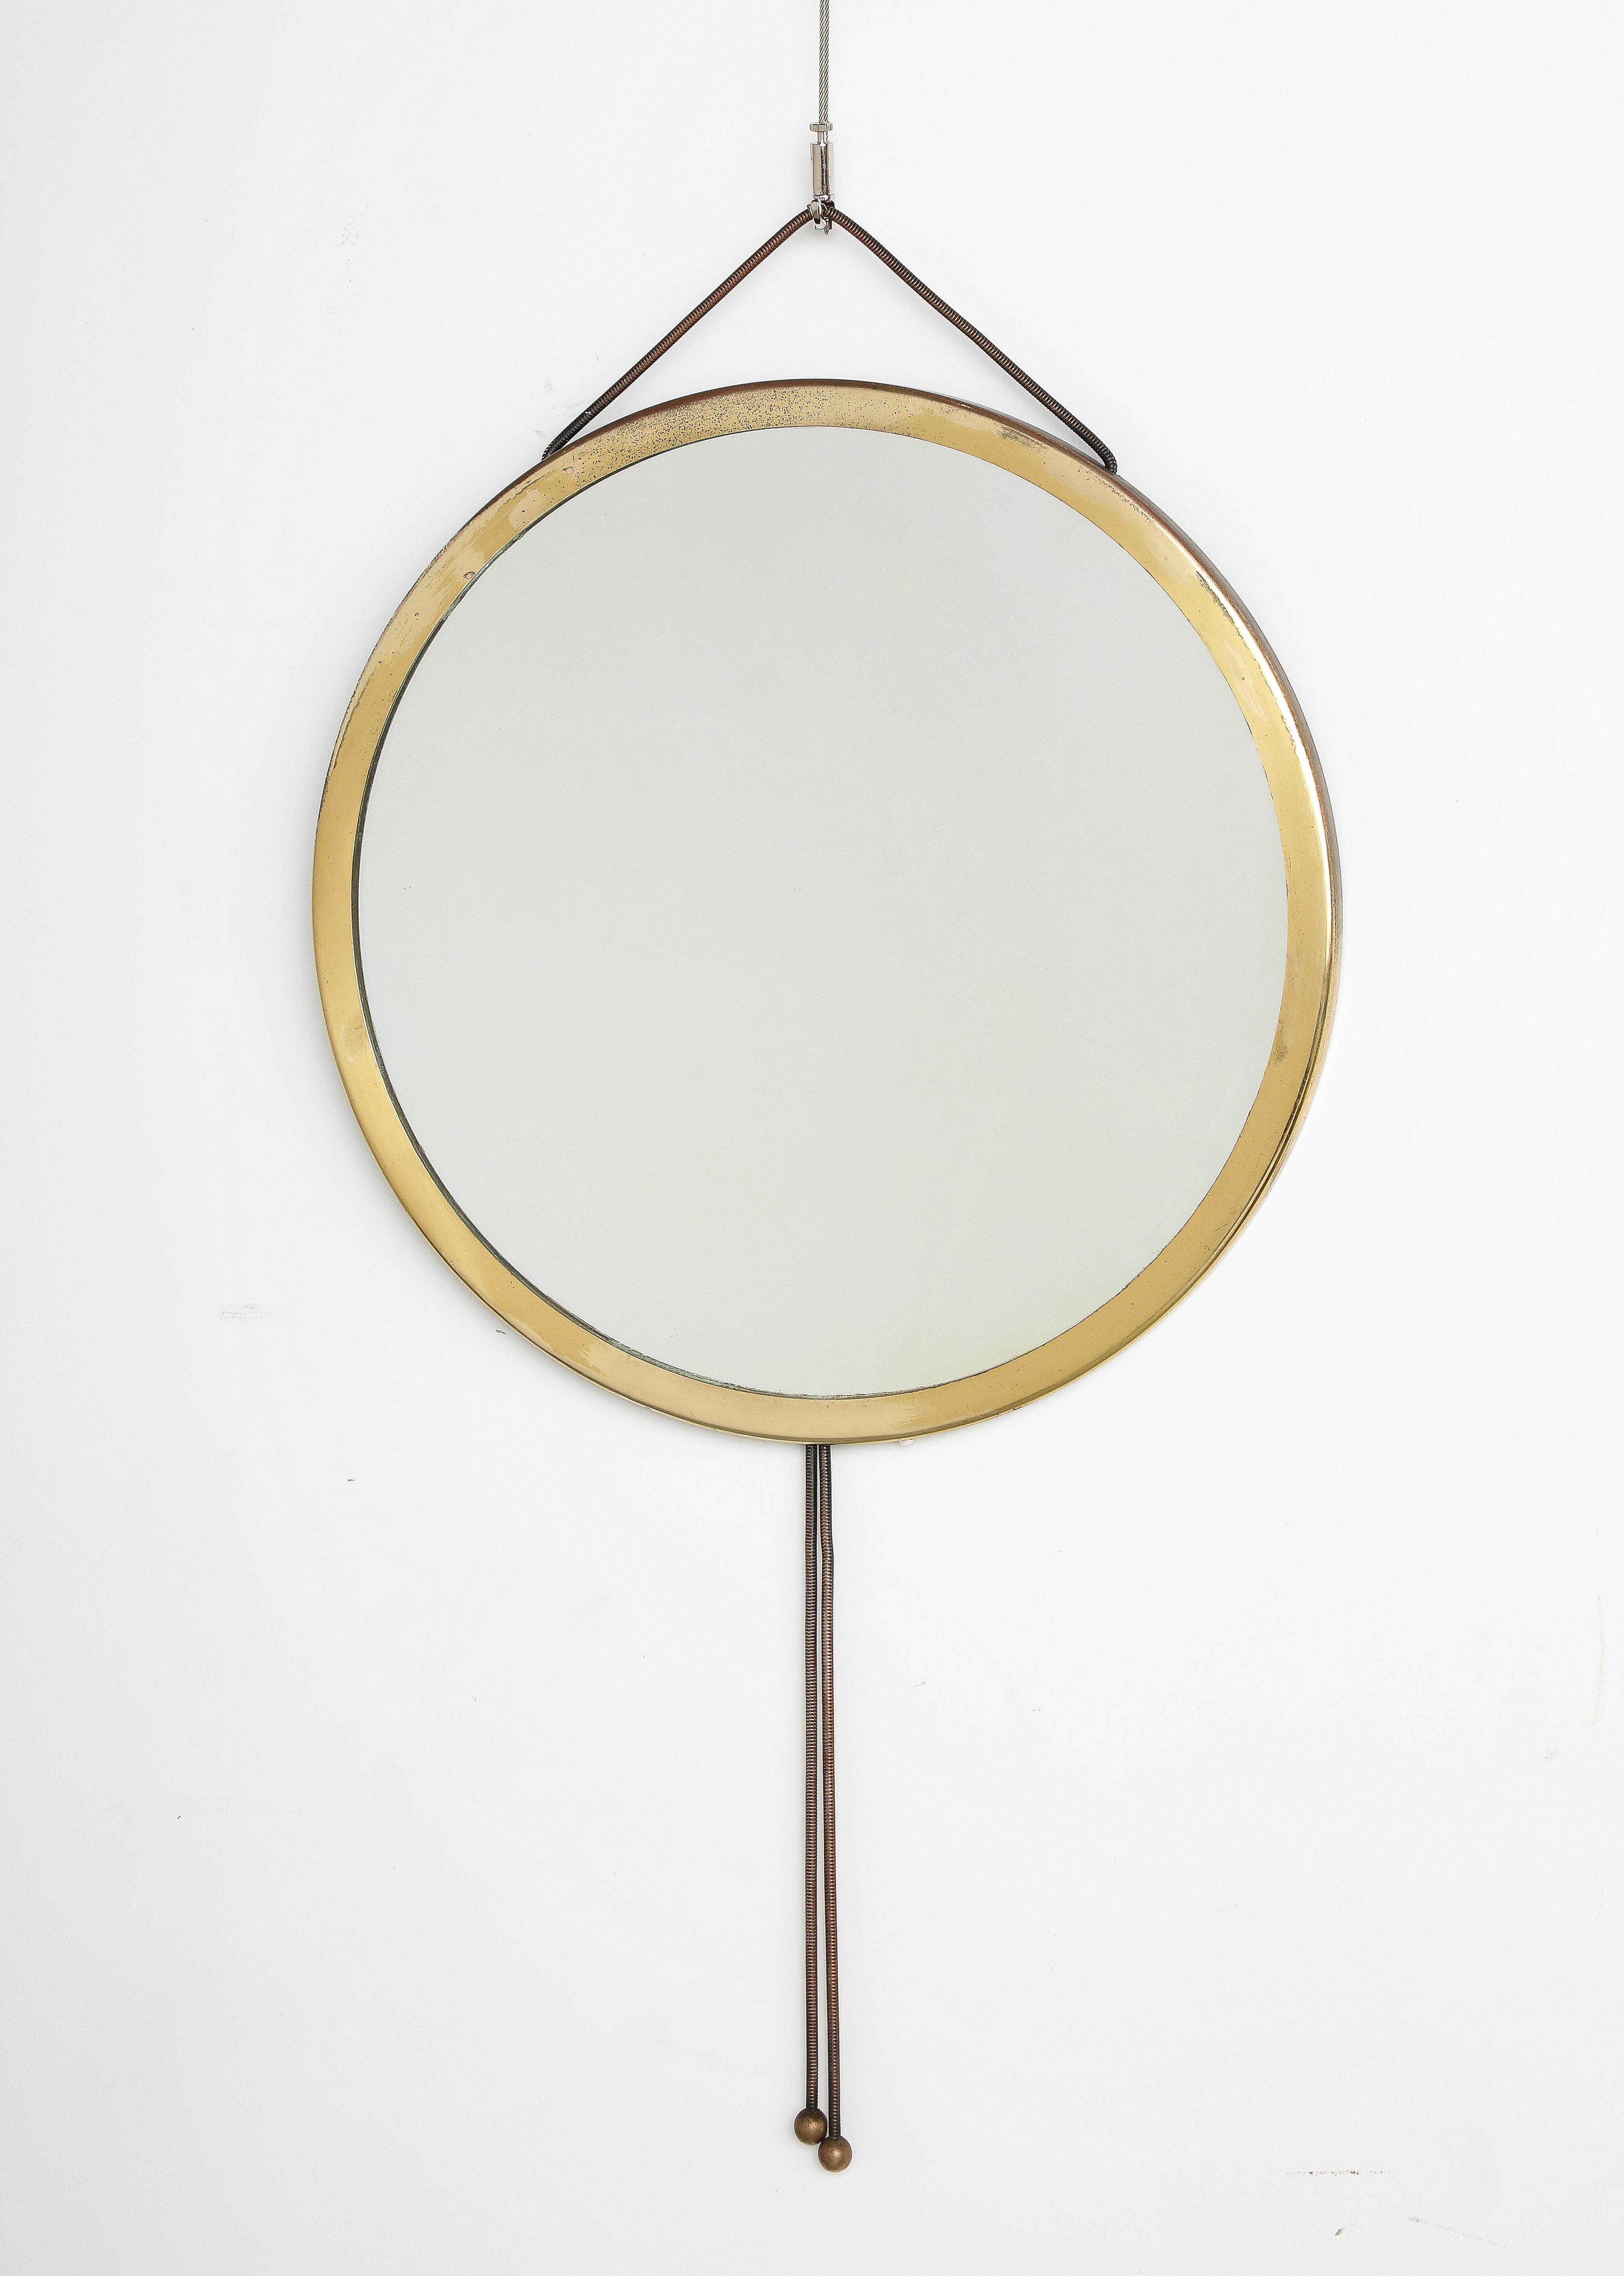 A circular brass wall mirror, designed by Corrado Corradi Dell' Acqua for Azucena, circa 1960.  The brass molded circular frame is hung with a cord on top which attaches to the back wood frame and is adjustable, the cord culminates in tassels in